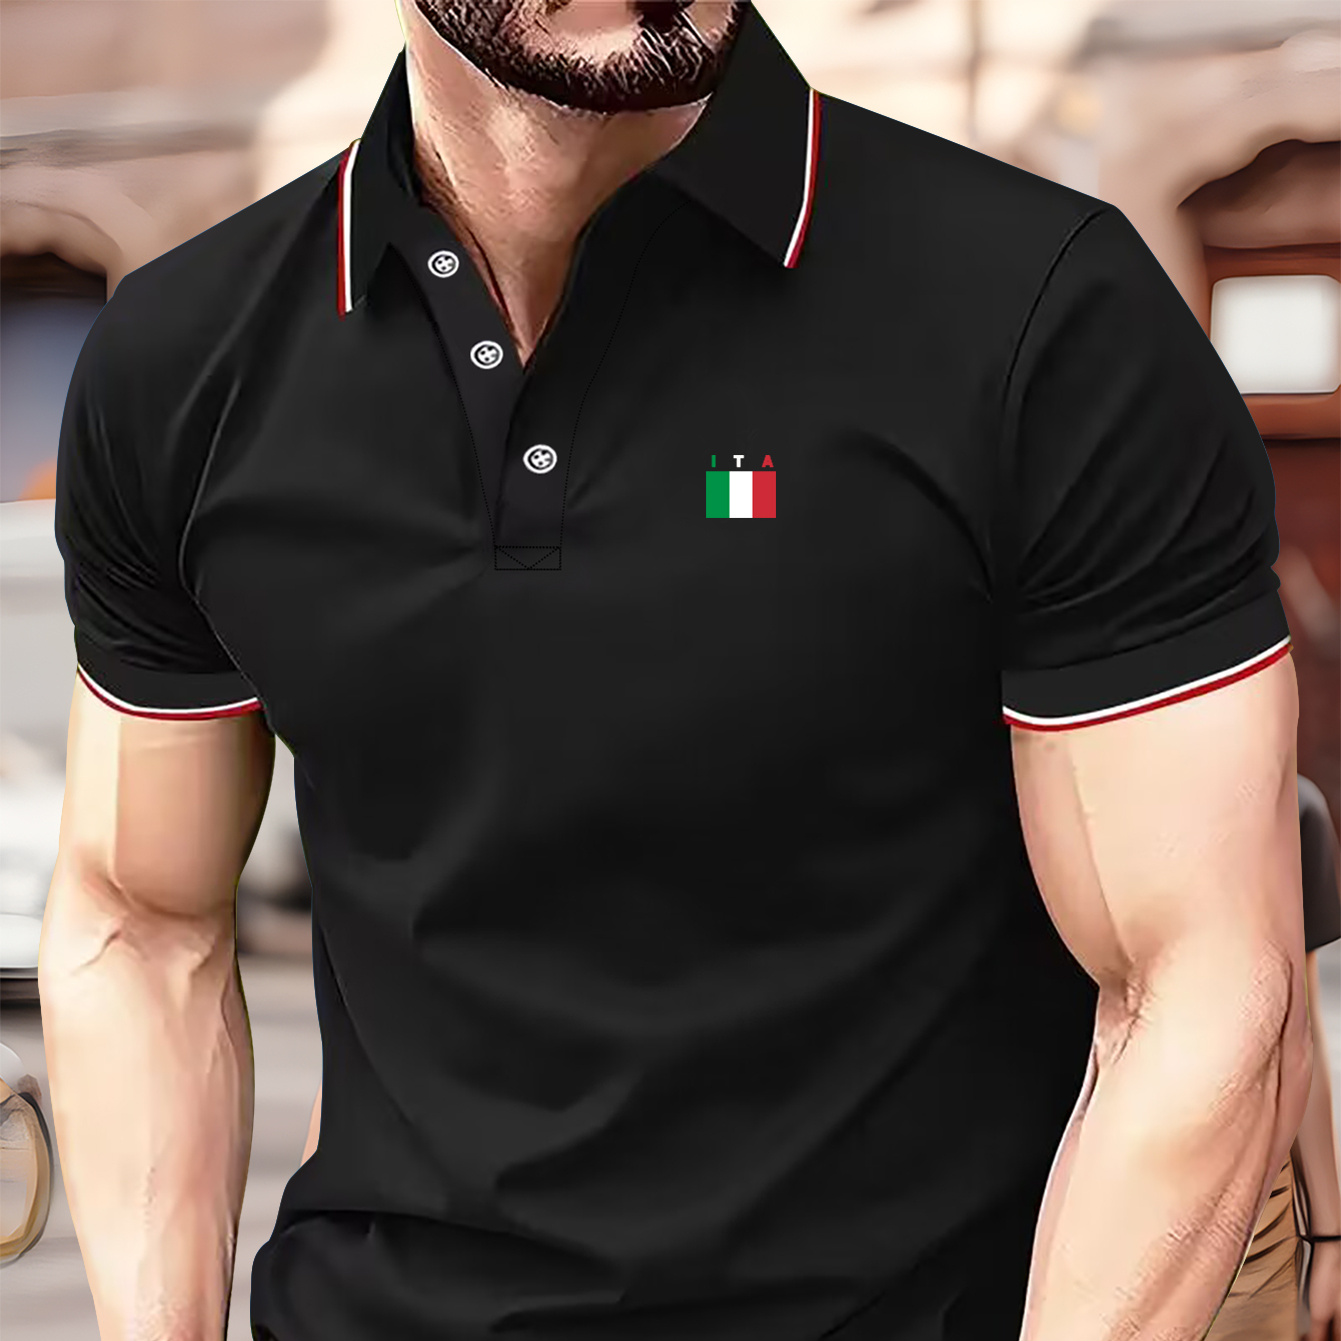 

Italy Flag Print Men's Short Sleeve Lapel Golf T-shirt, Summer Trendy Tennis Tees, Casual Comfy Breathable Top For Outdoor Sports